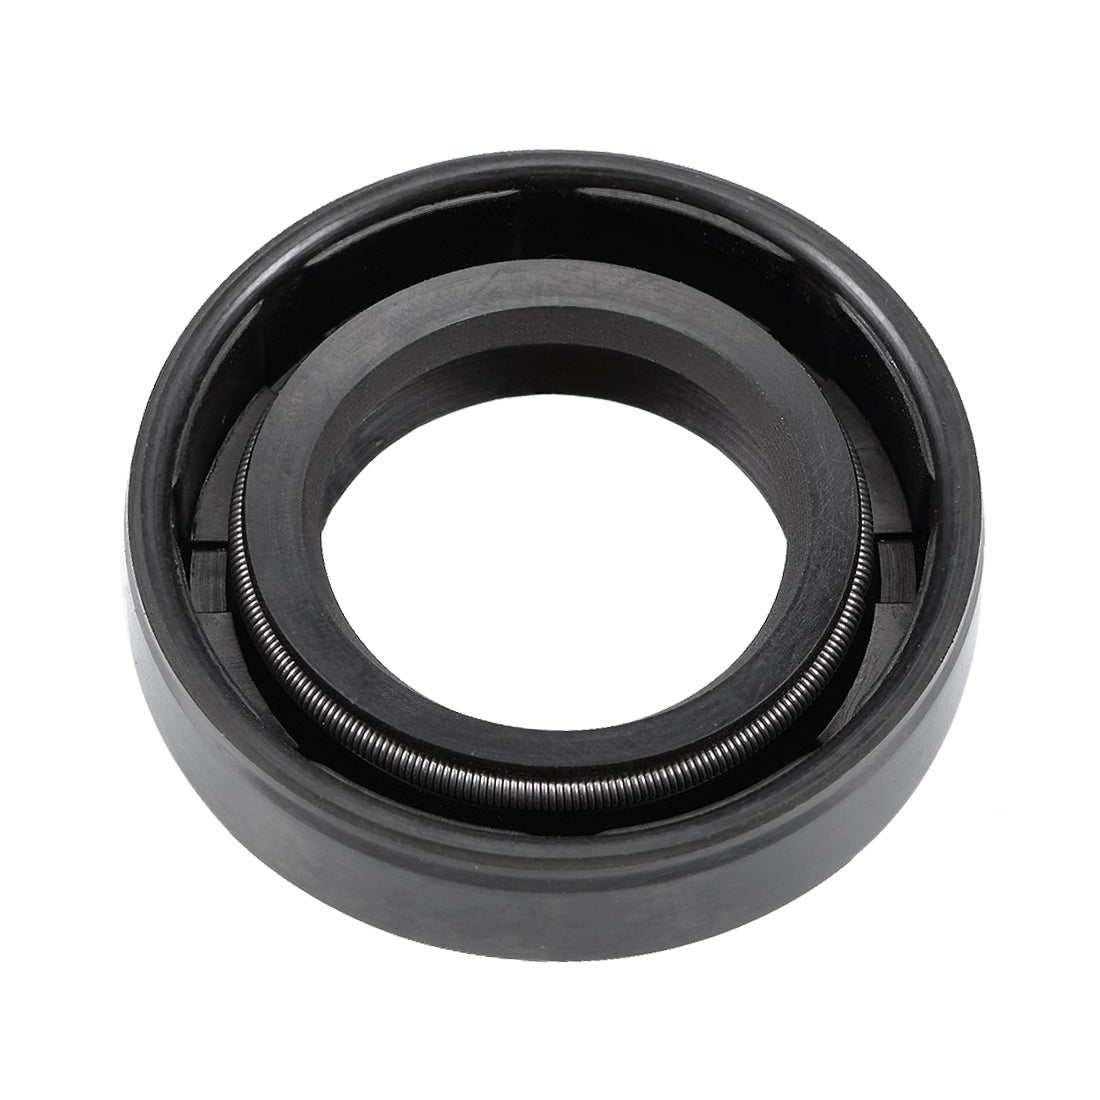 Uxcell Uxcell Oil Seal, TC 20mm x 34mm x 7mm, Nitrile Rubber Cover Double Lip